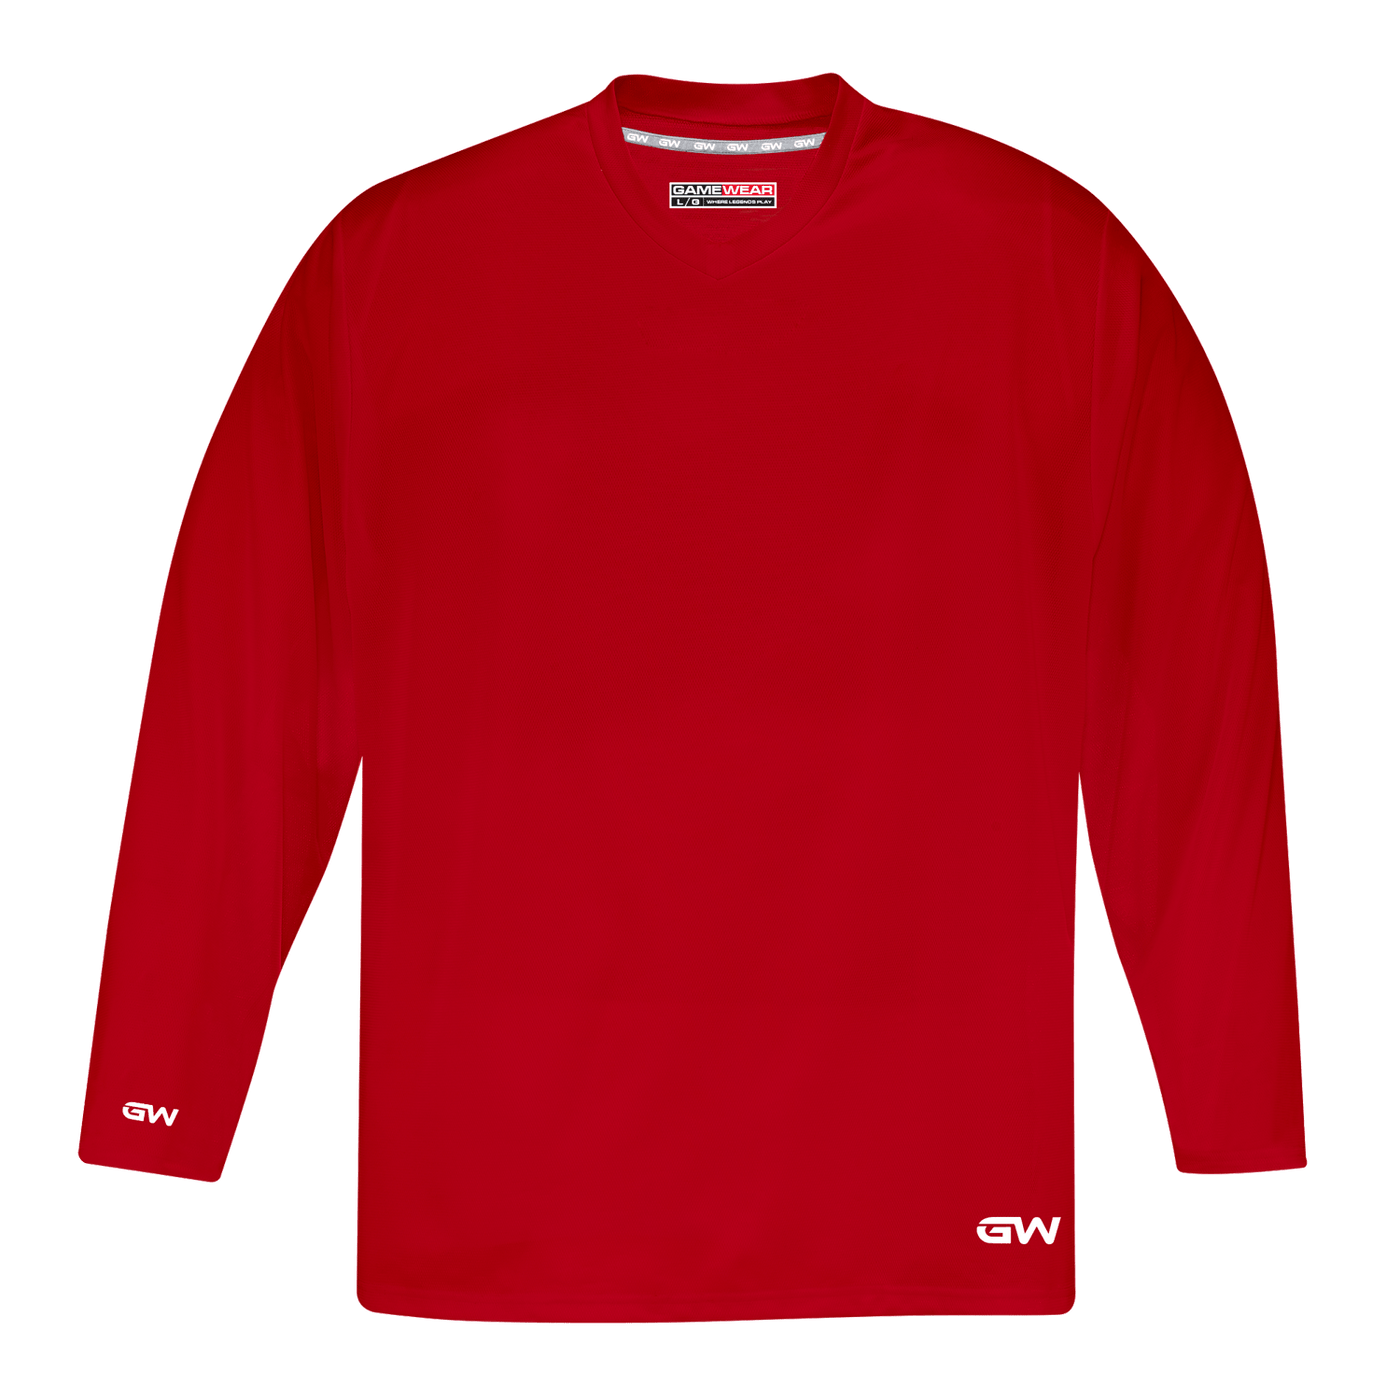 GameWear GW5500 ProLite Series Senior Hockey Practice Jersey - Red - The Hockey Shop Source For Sports